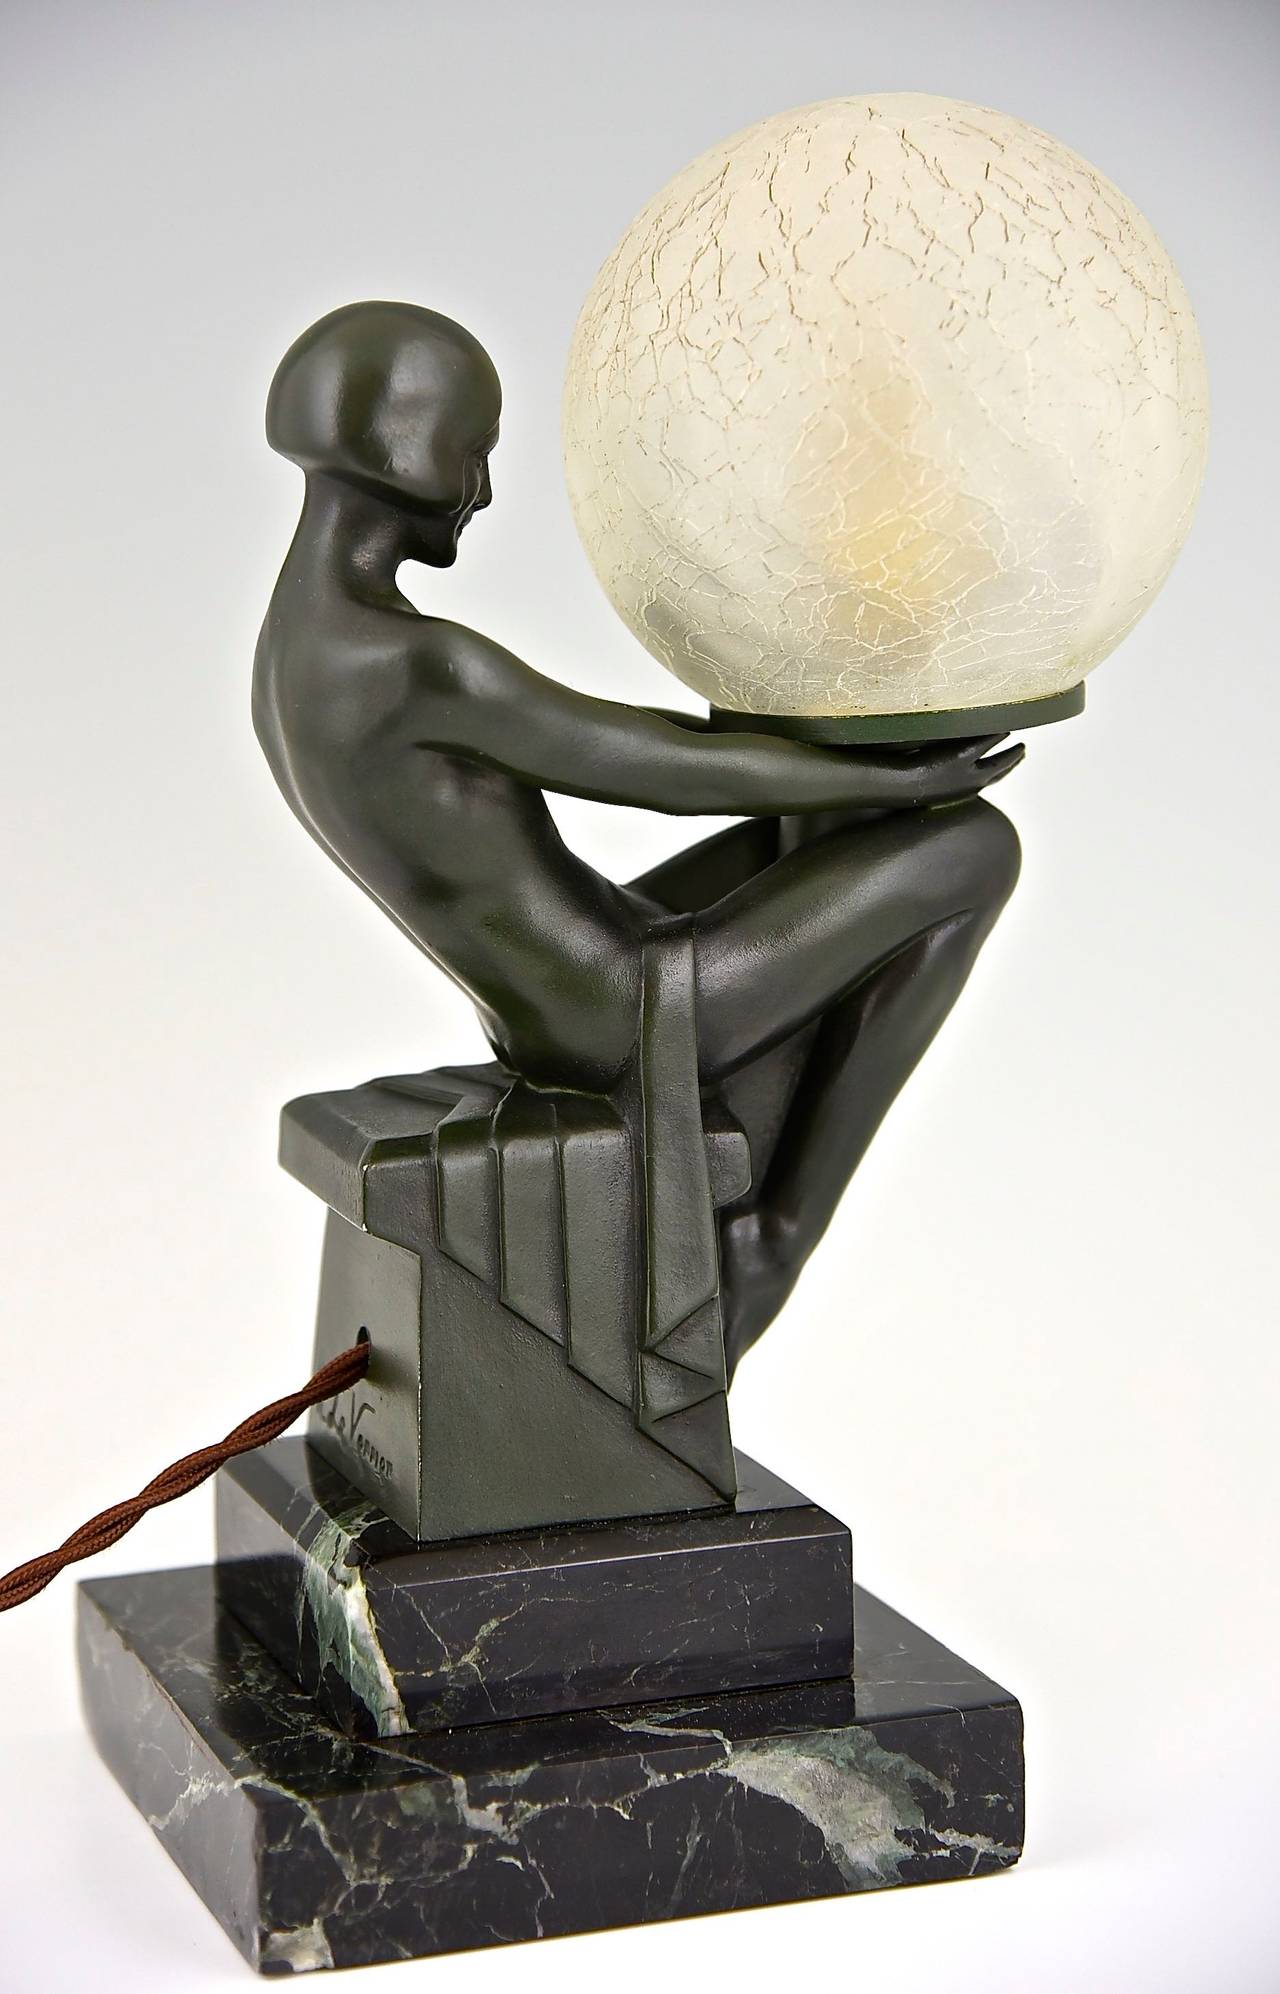 20th Century French Art Deco Lamp with Nude by Max Le Verrier, 1930